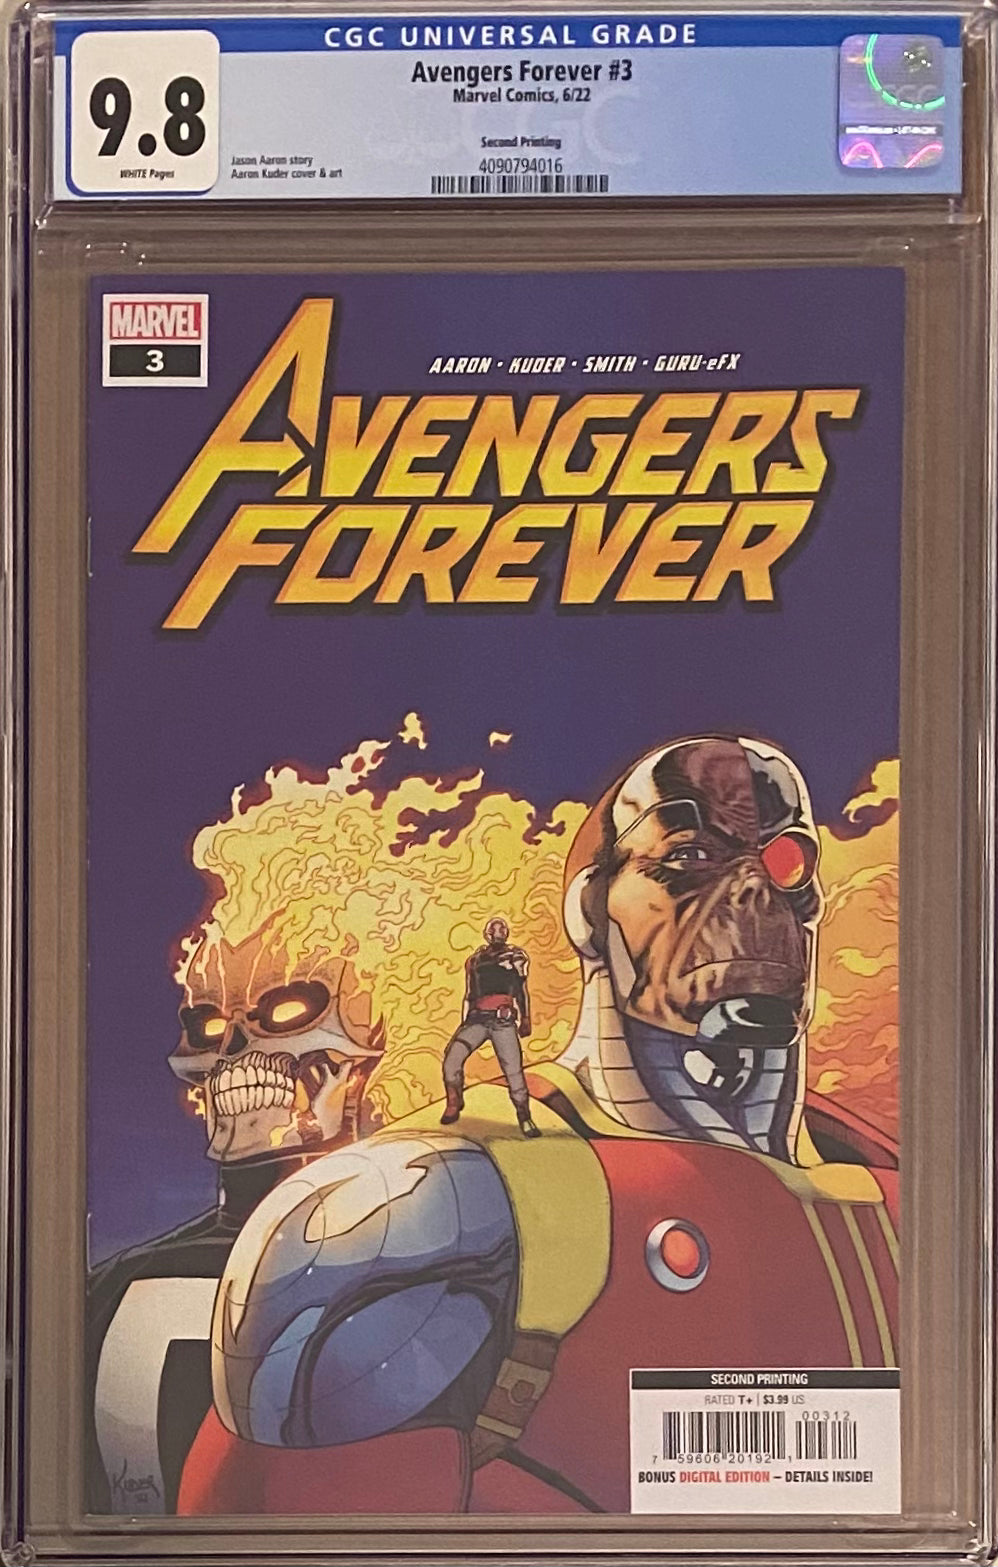 Avengers Forever #3 Second Printing CGC 9.8